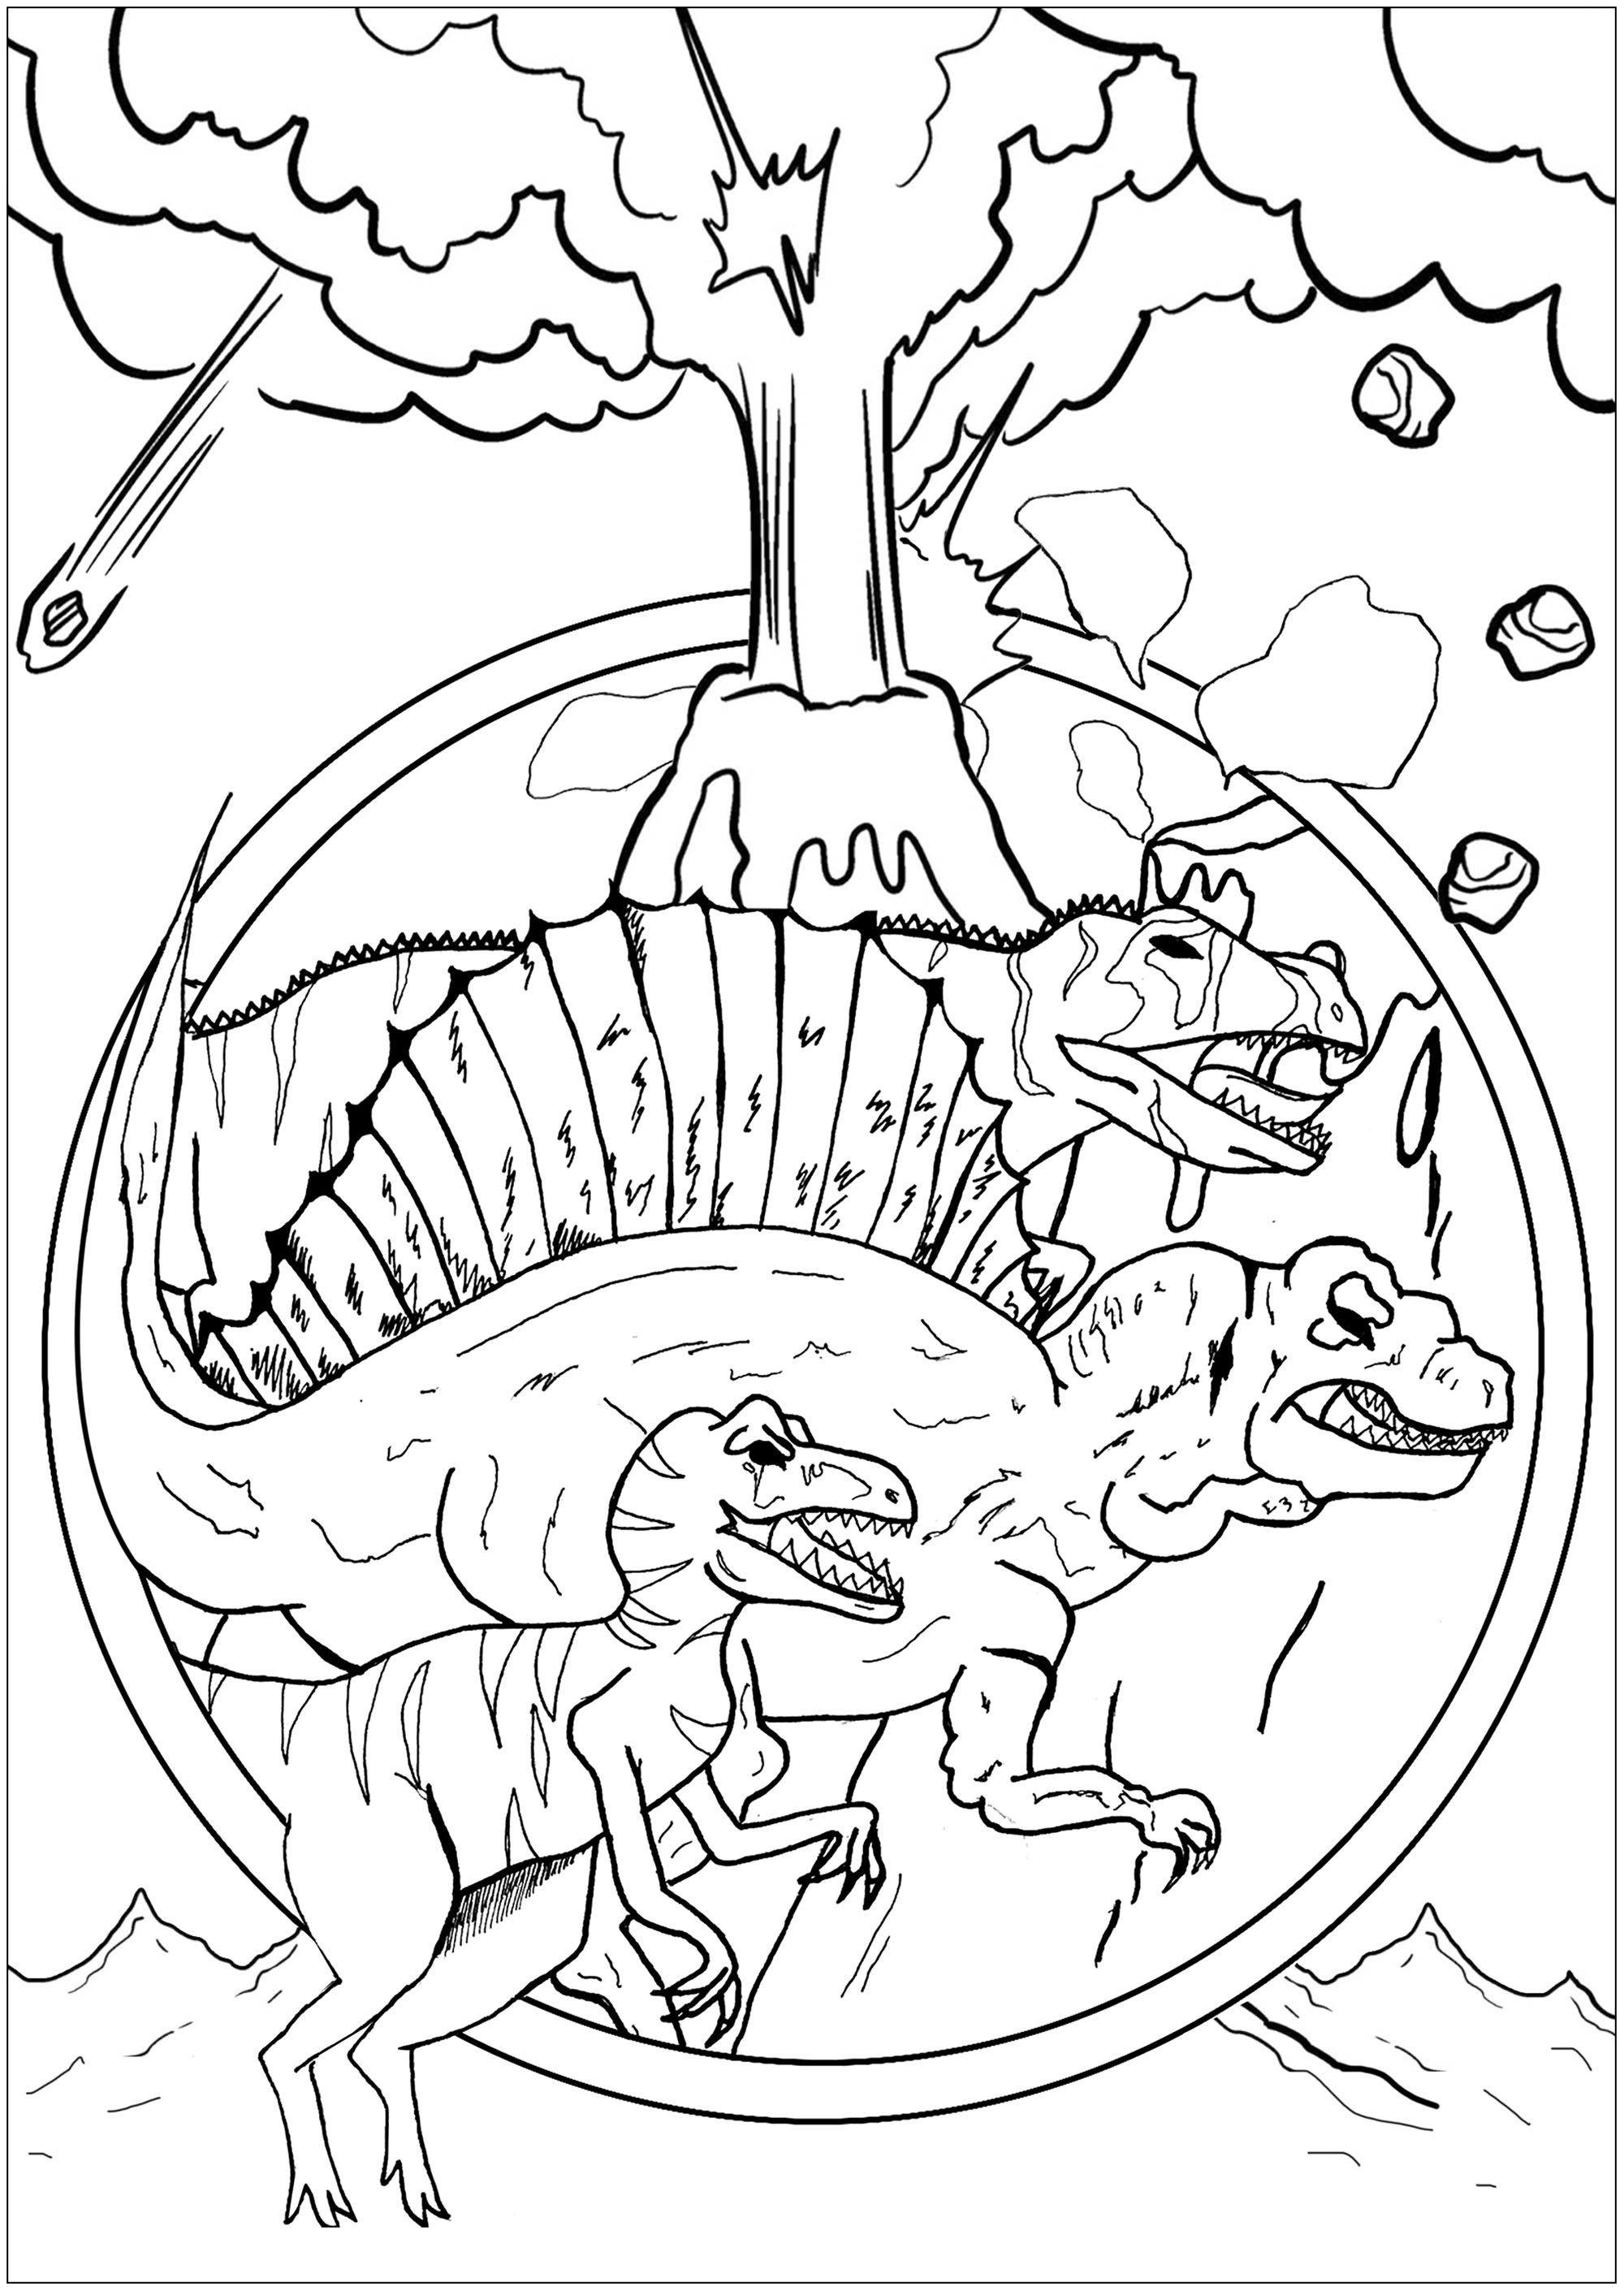 Volcanic Eruption Coloring Pages